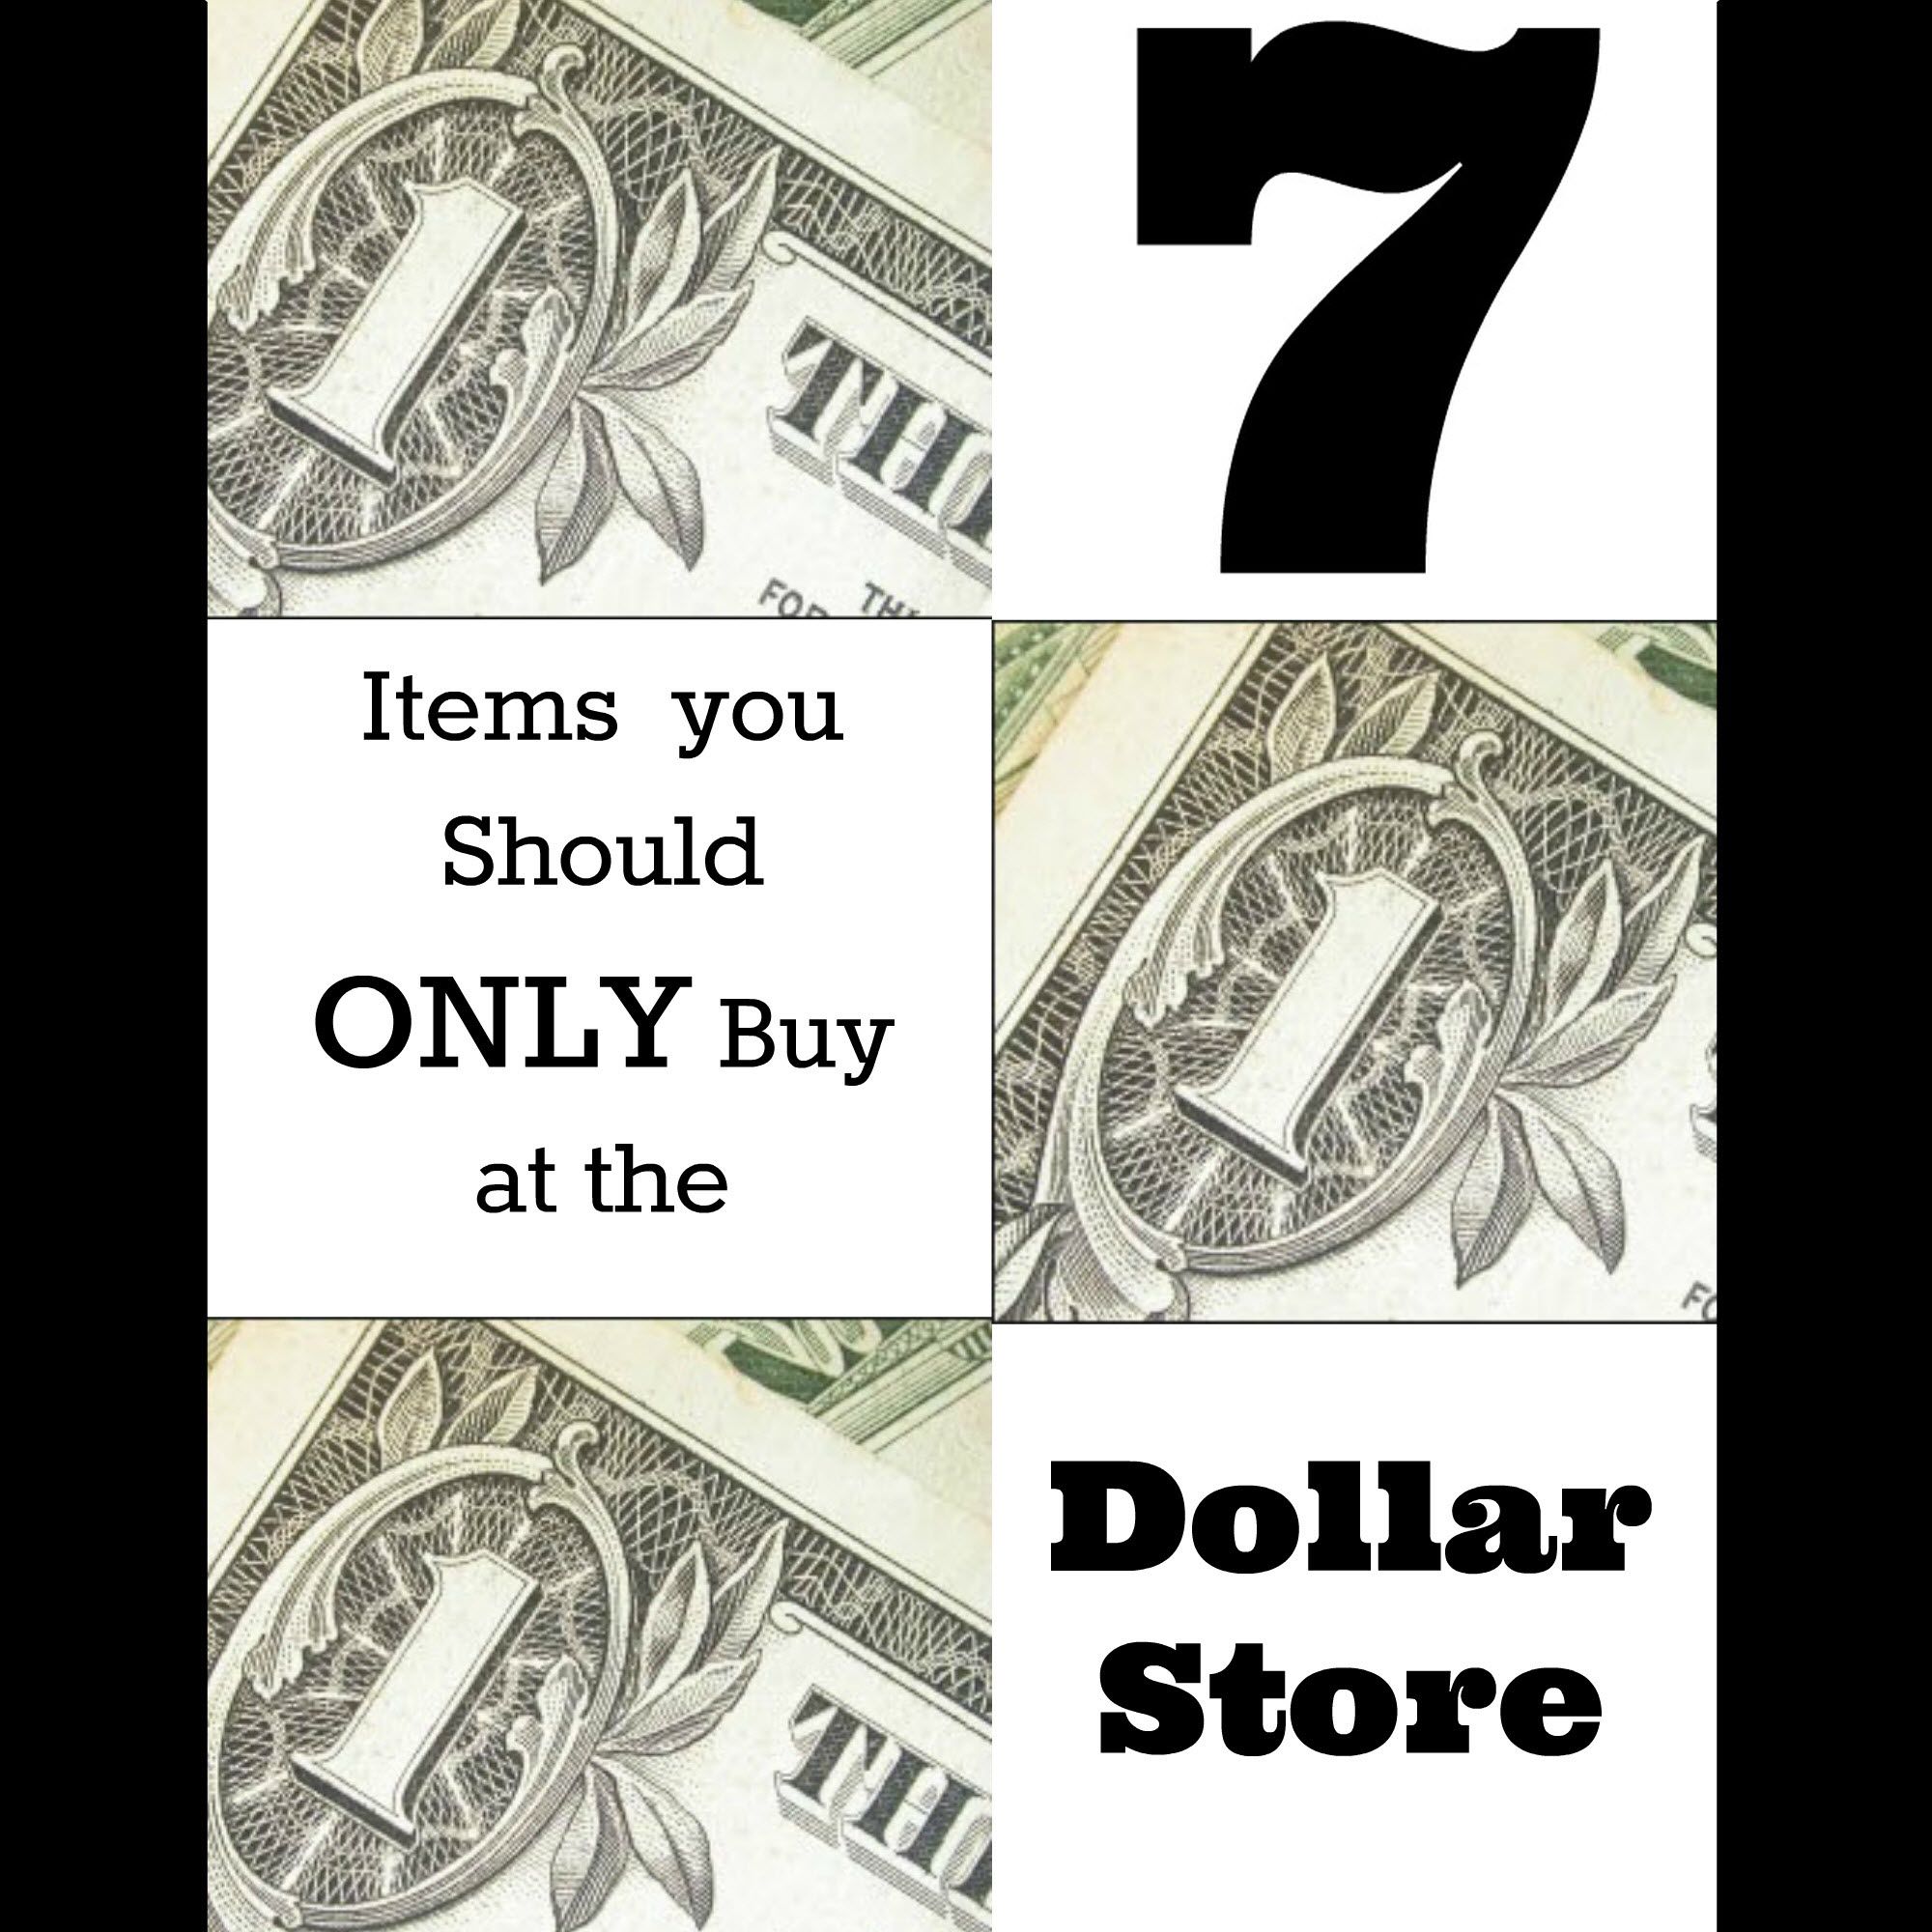 Items You Should Only Buy At the Dollar Store